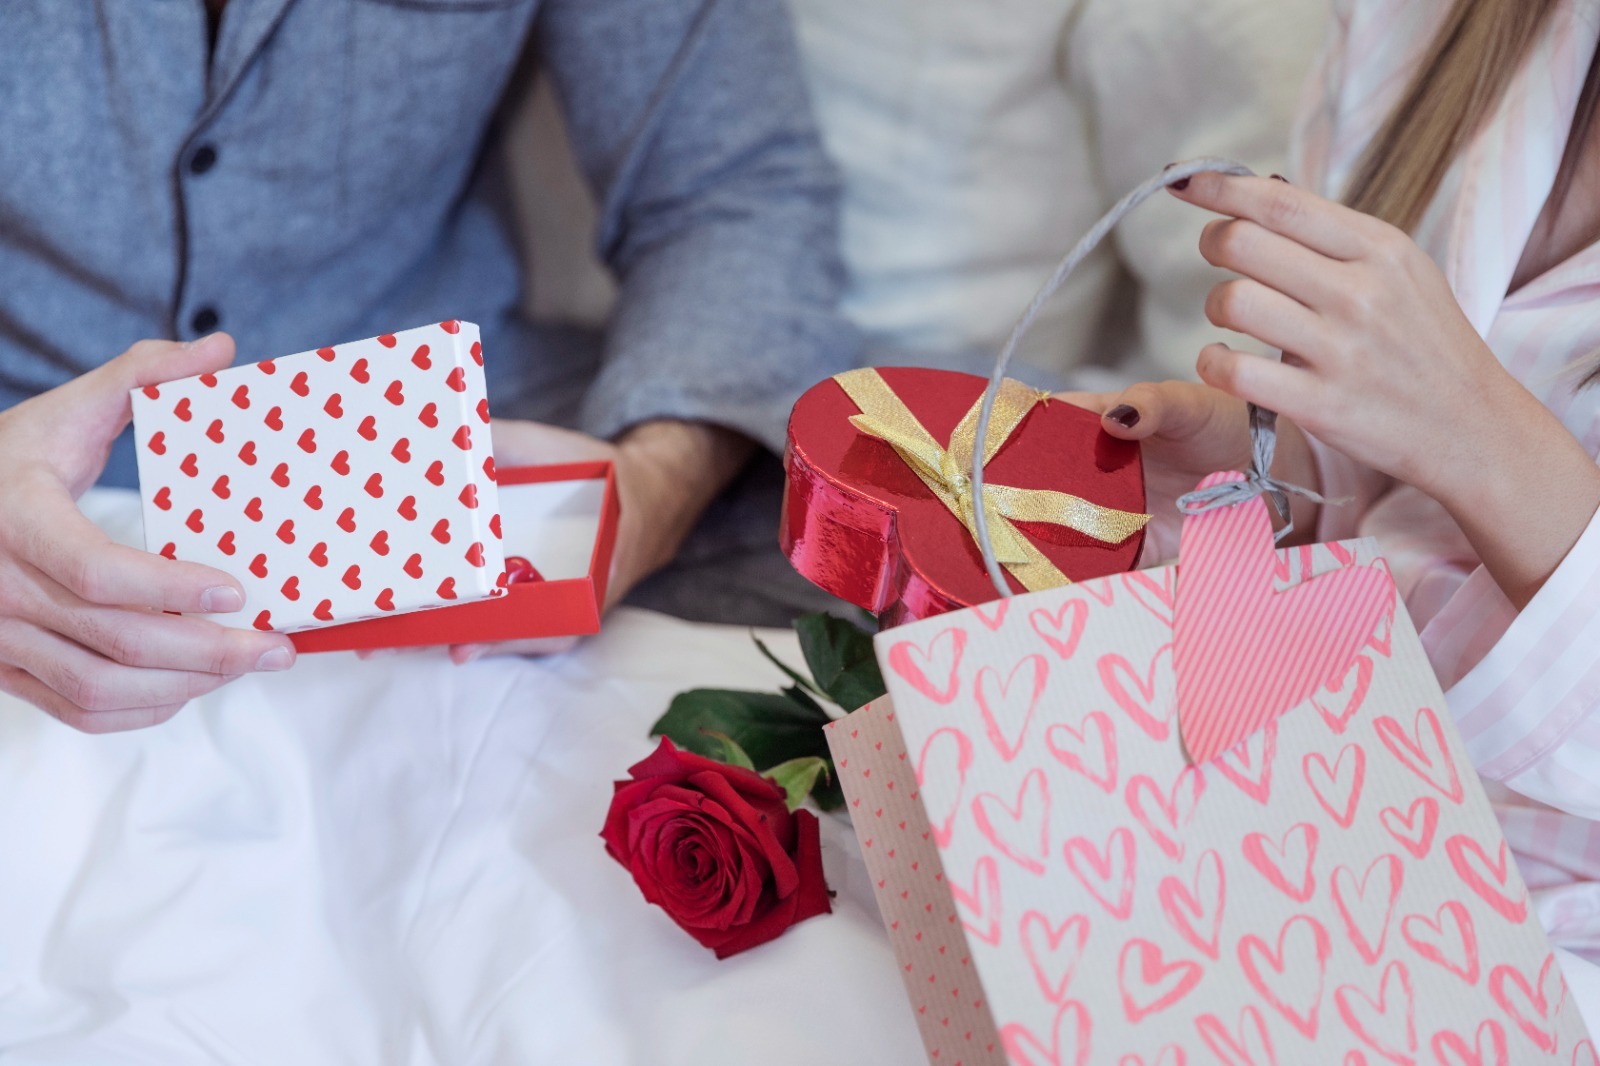 Procon-AM advises consumers to purchase Valentine’s Day gifts